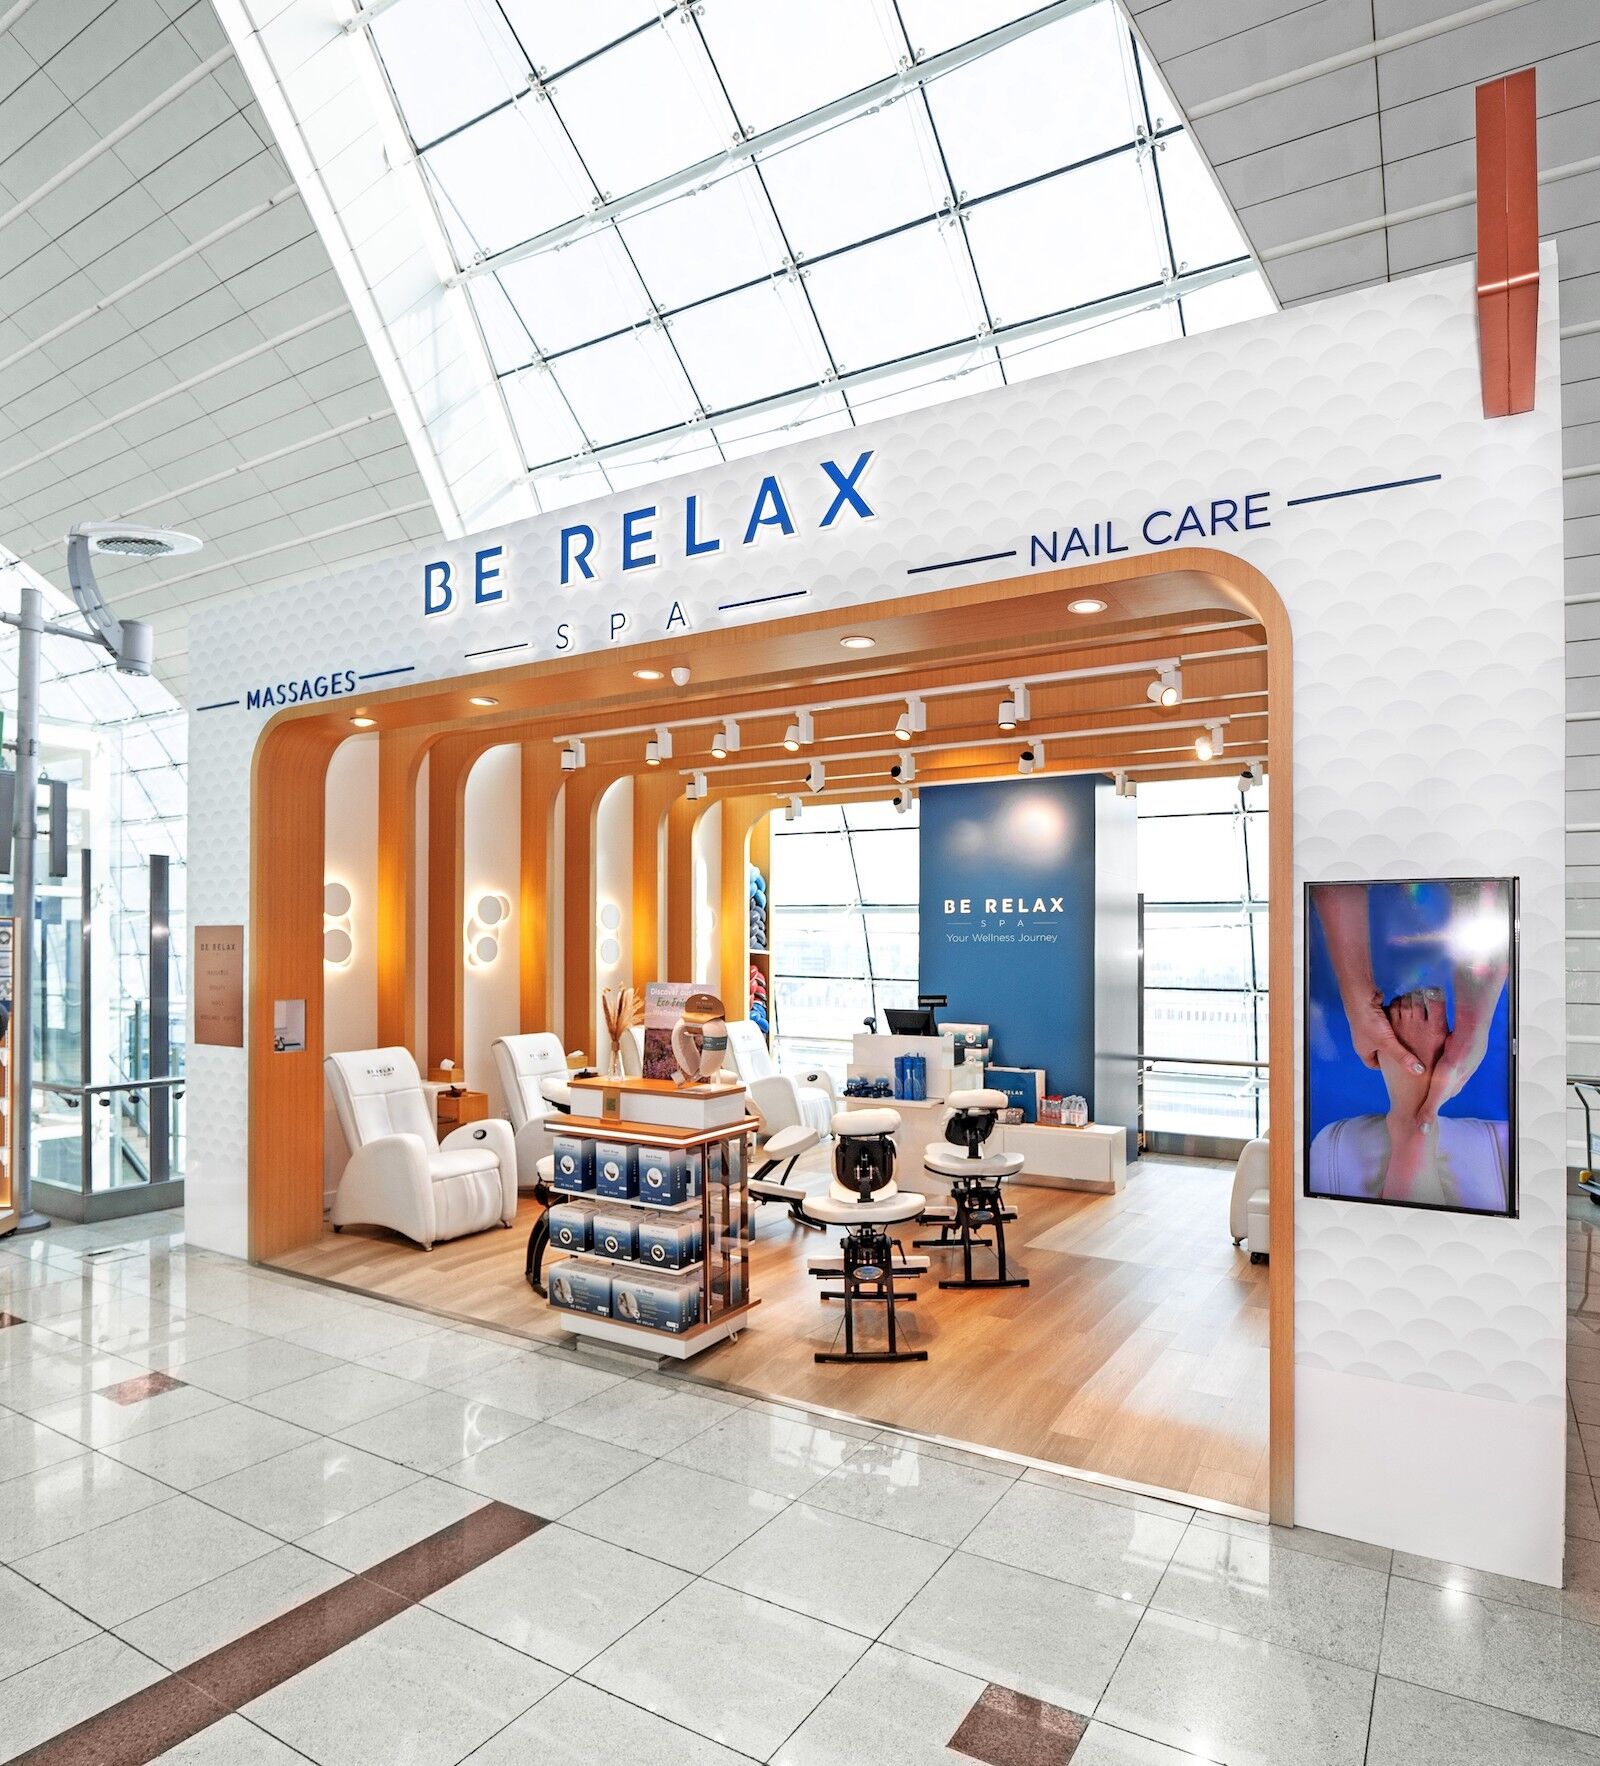 Be Relax spa, where you can get body treatments and massages, are in many airports around the world